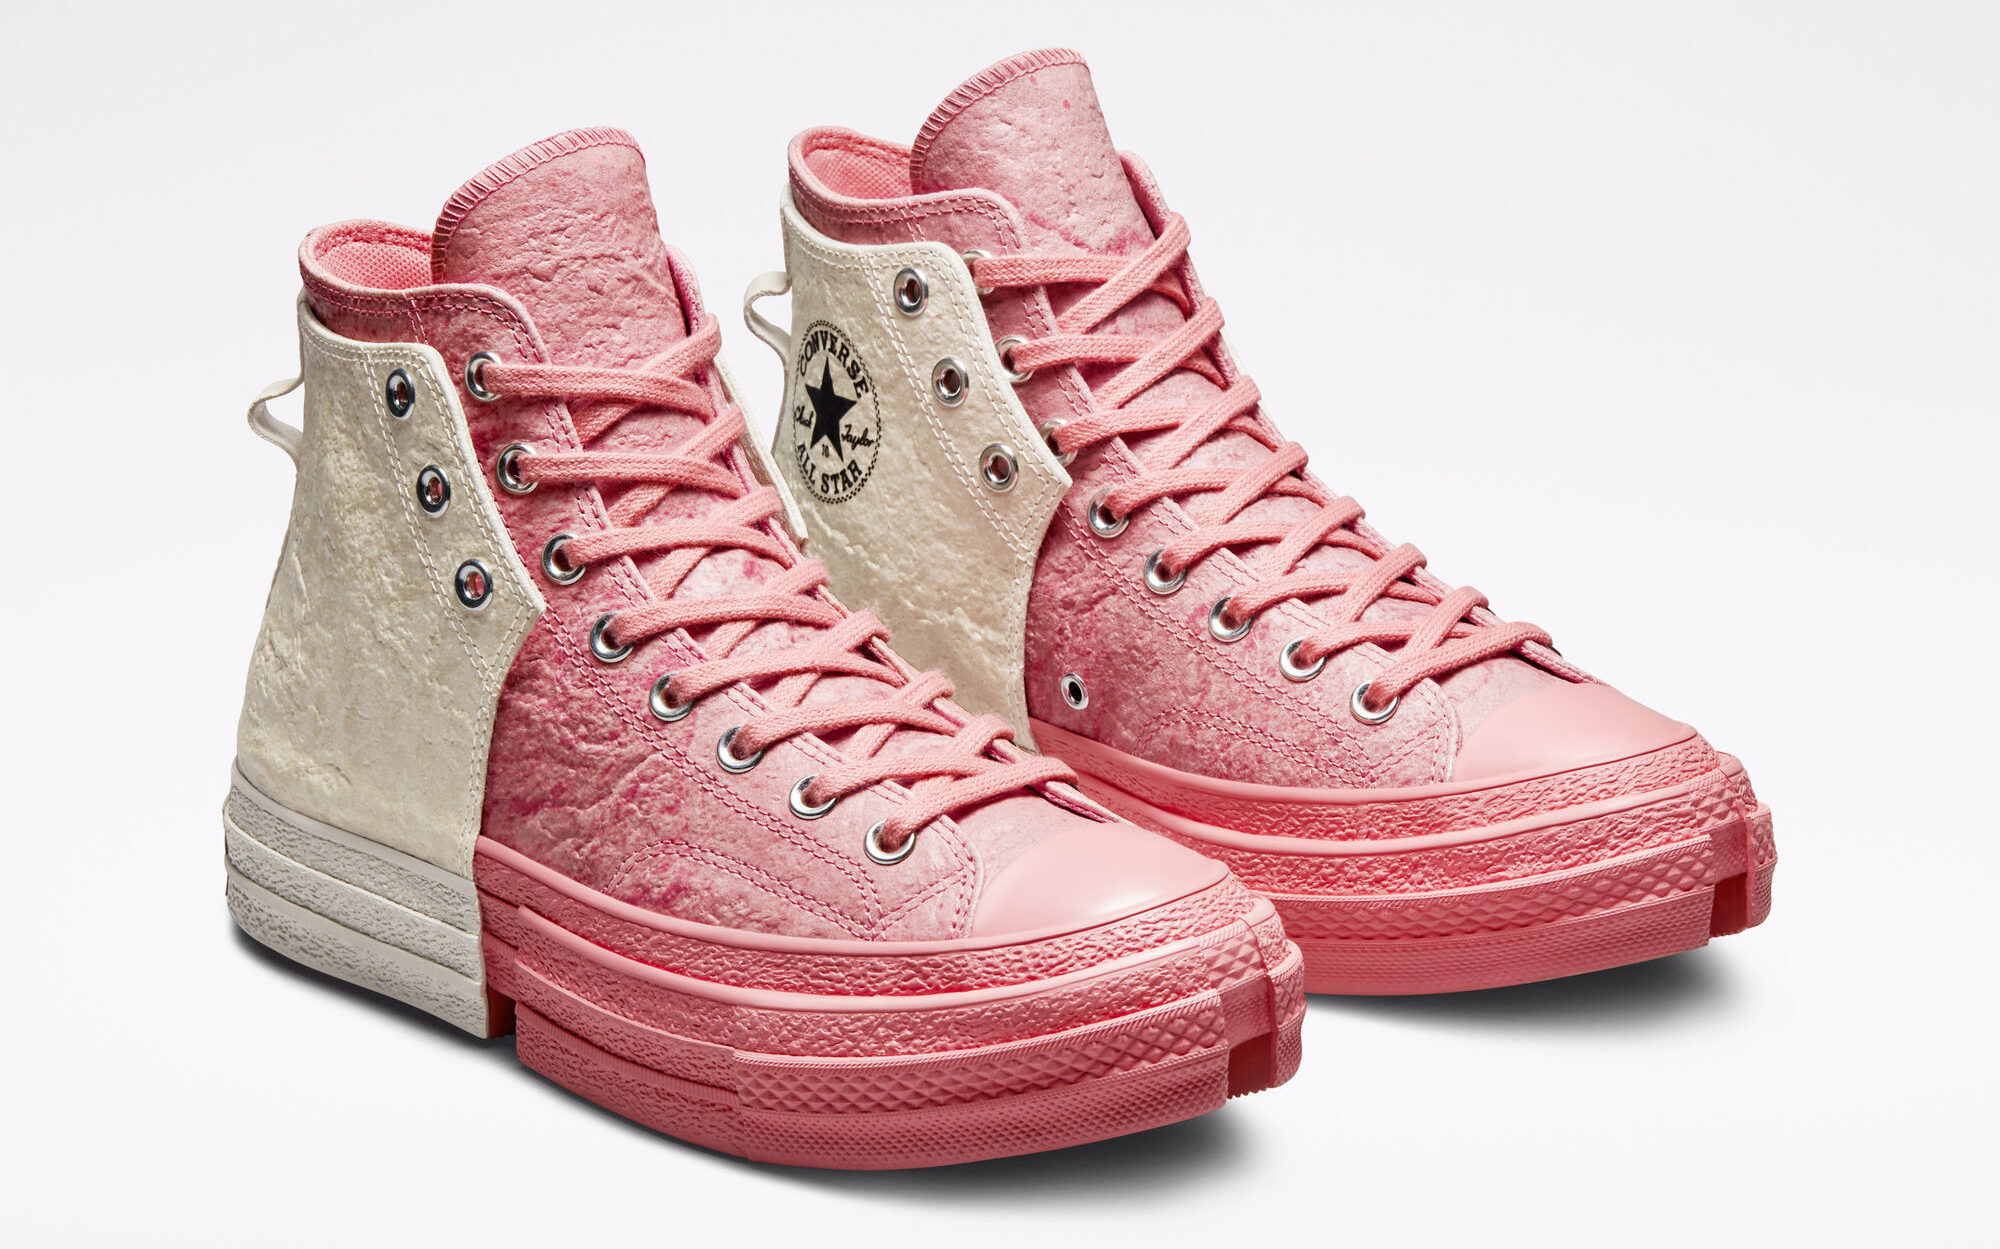 Limited Edition Converse x Feng Chen Wang 2-in-1 Chuck 70 High Top